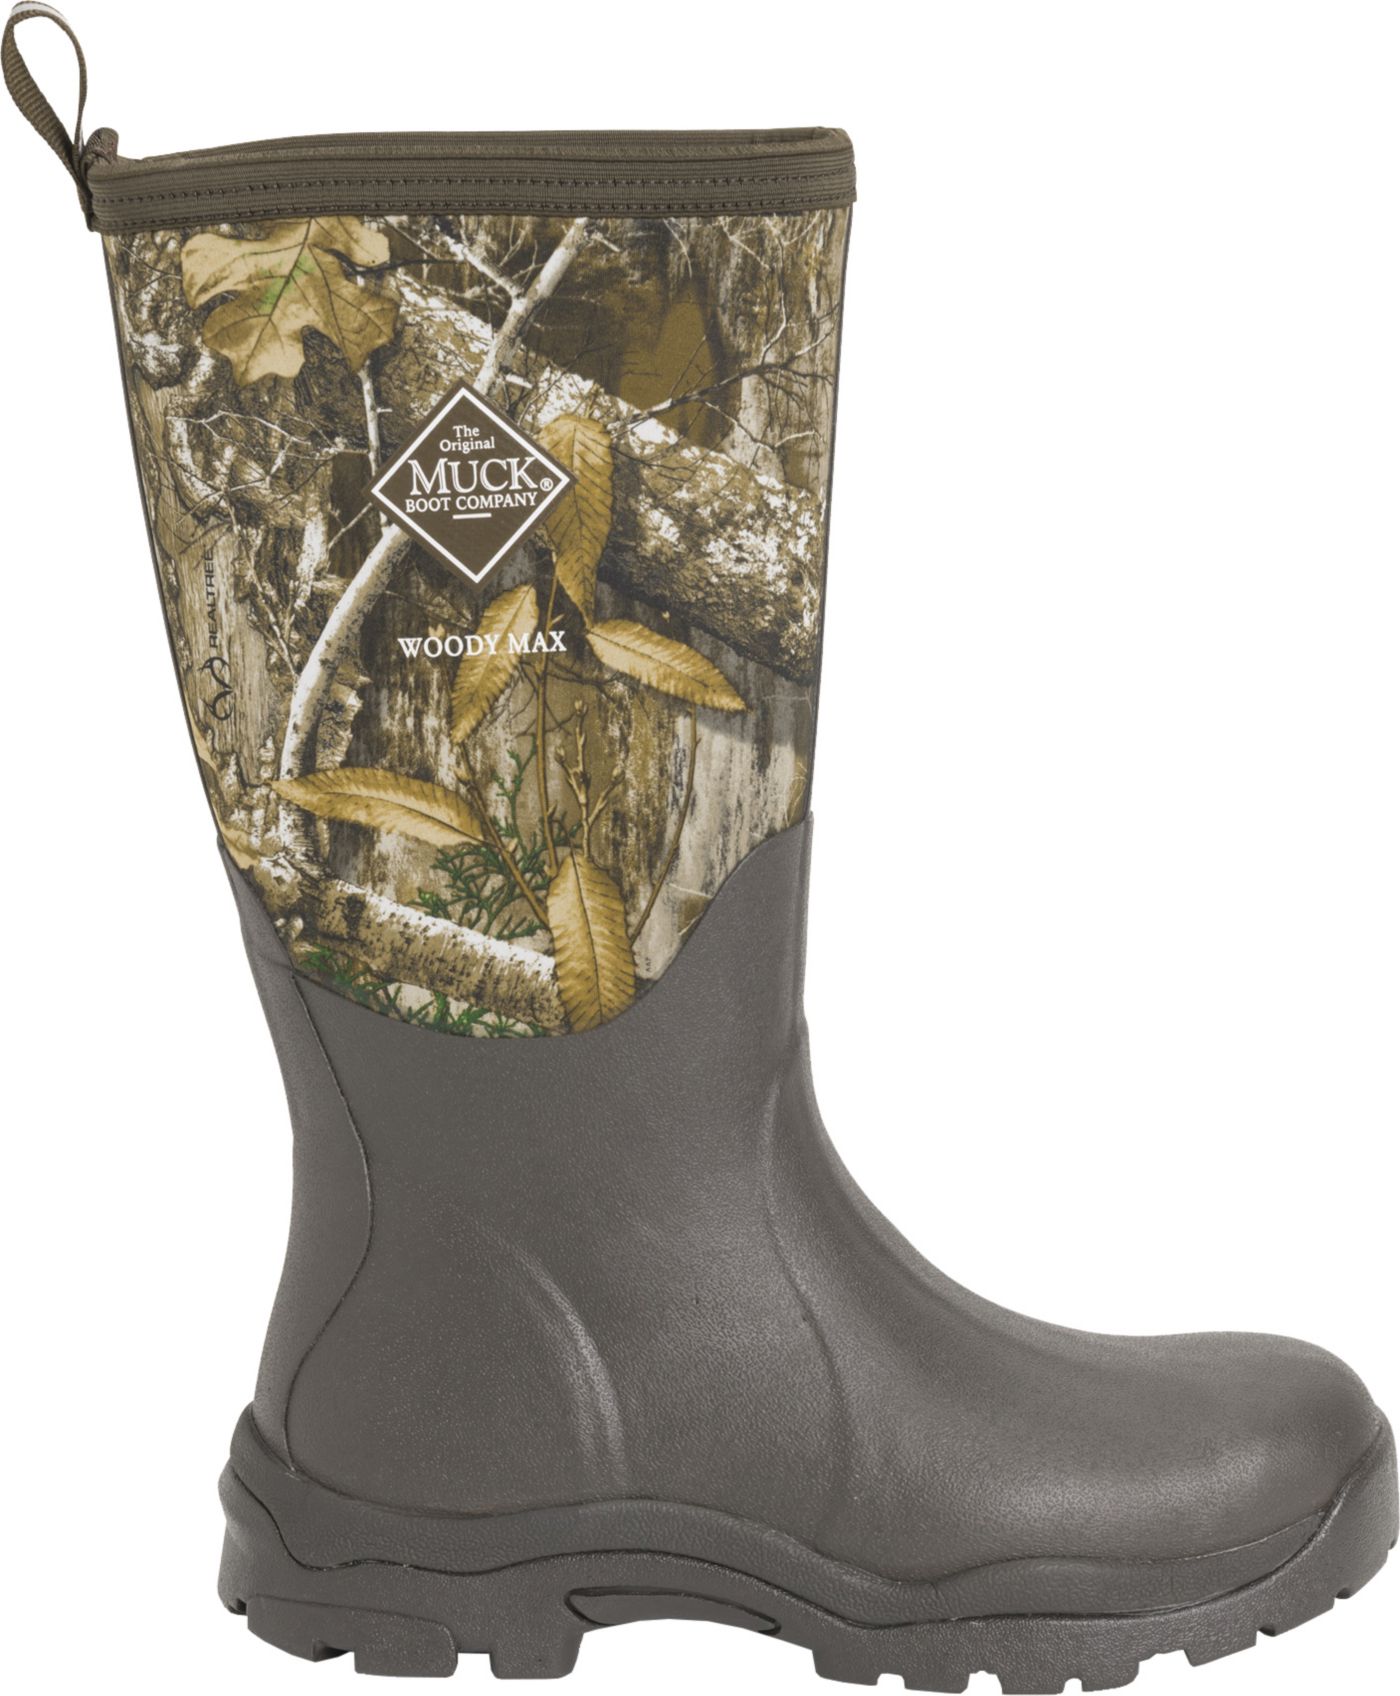 Muck Boots Women's Woody PK Rubber Hunting Boots | DICK'S Sporting Goods